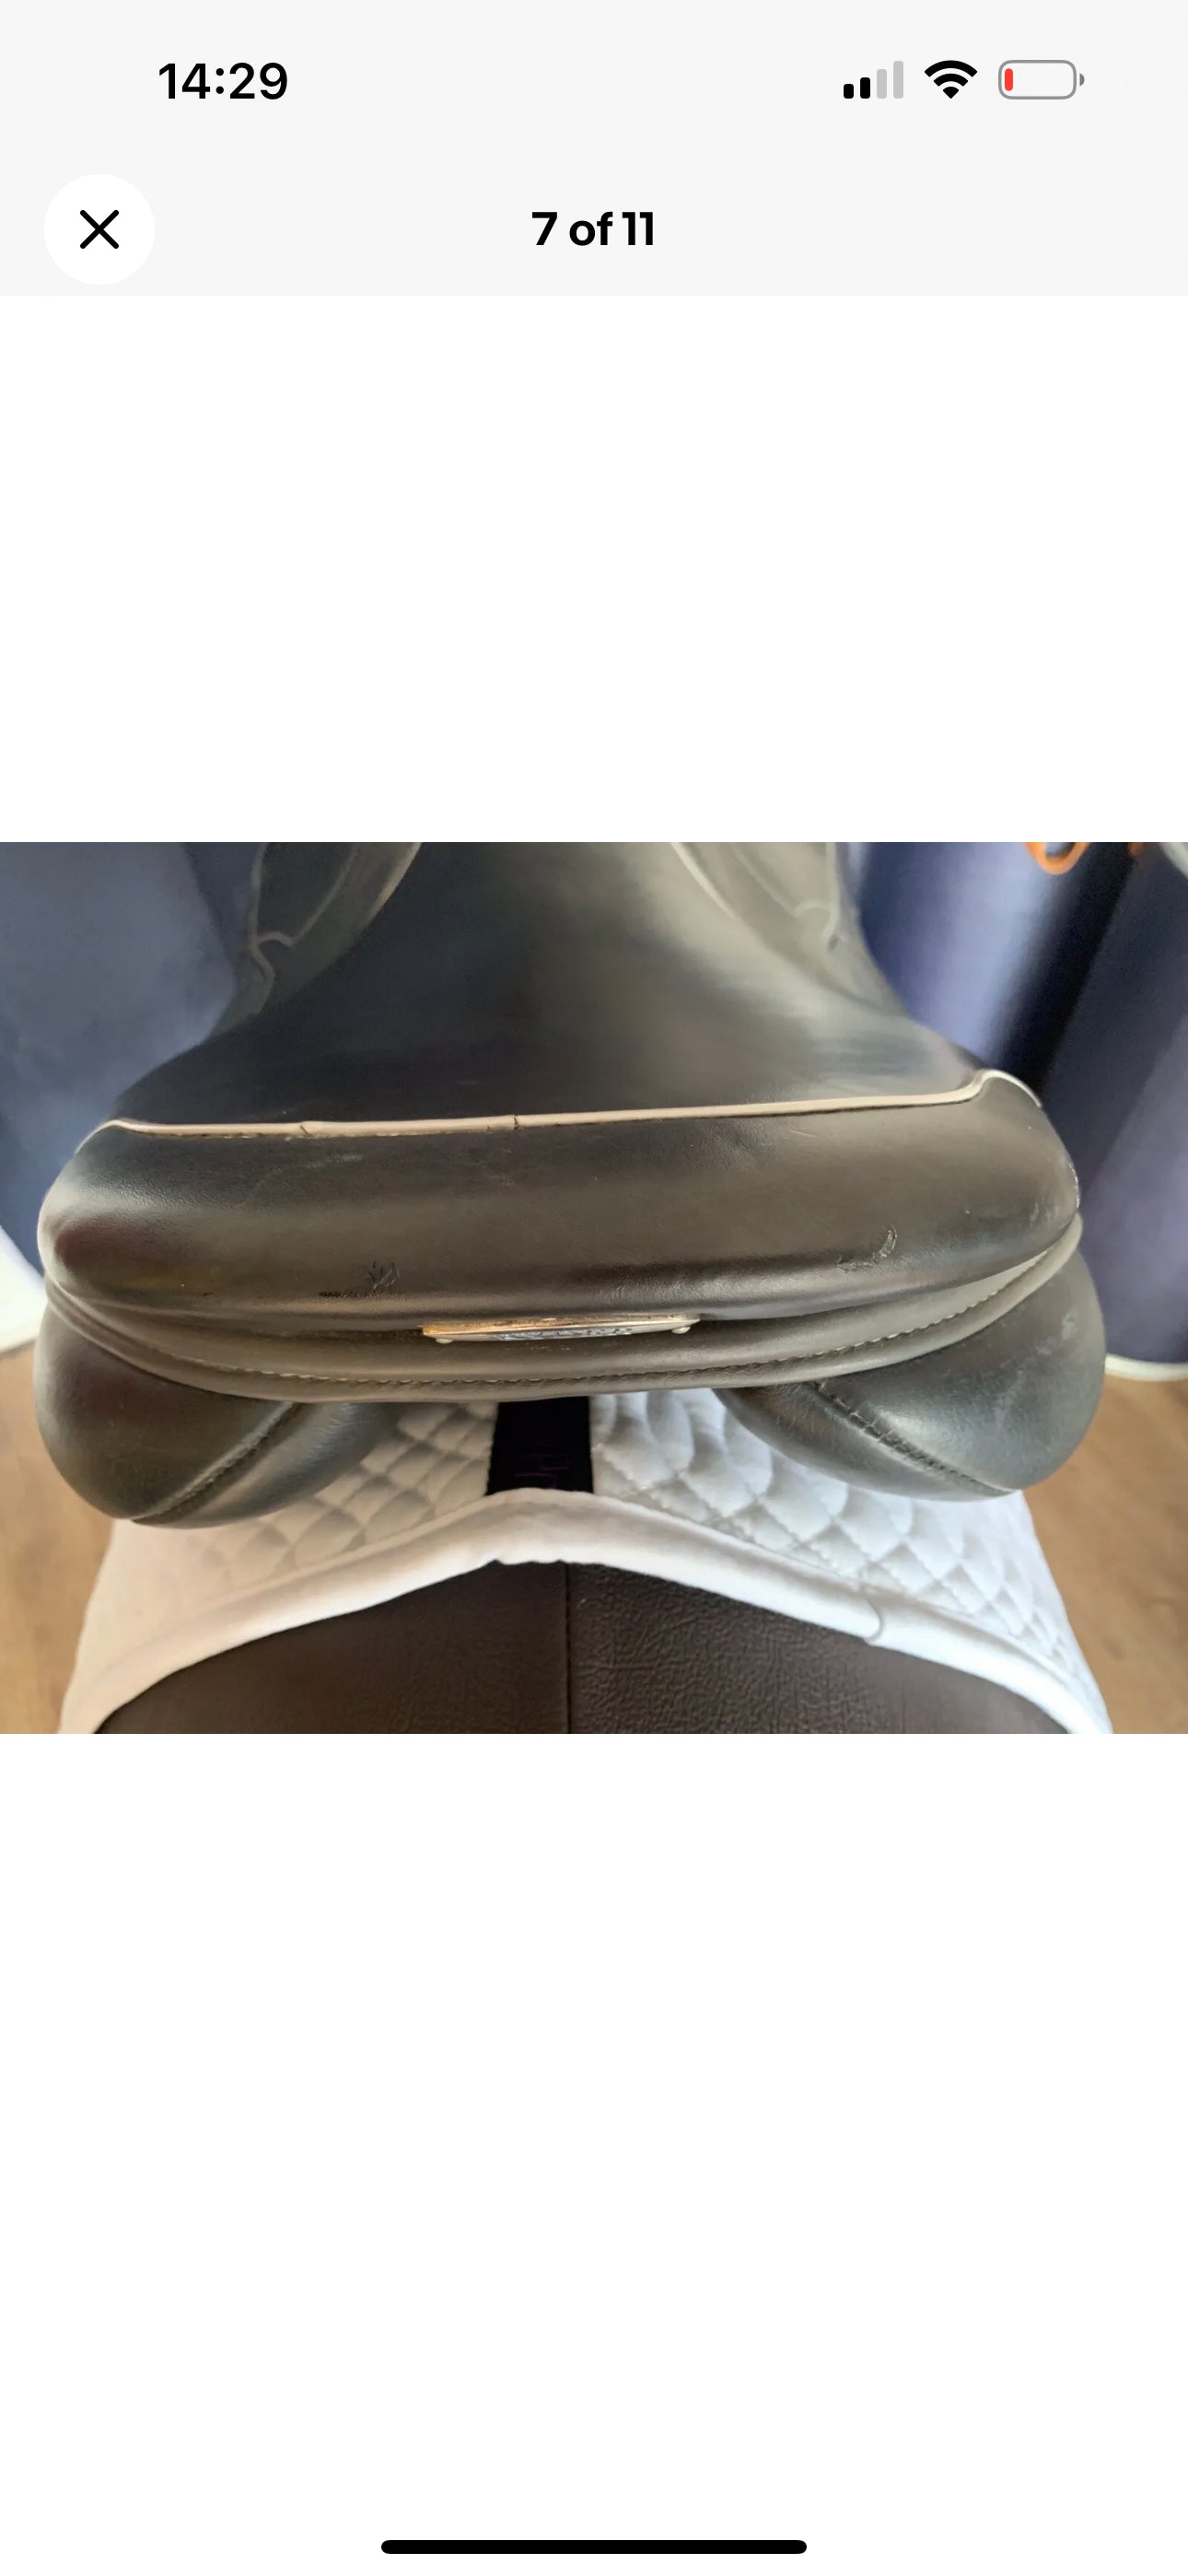 Ryder Trophee Monoflap Jumping Saddle  17.5” Wide fit  USED